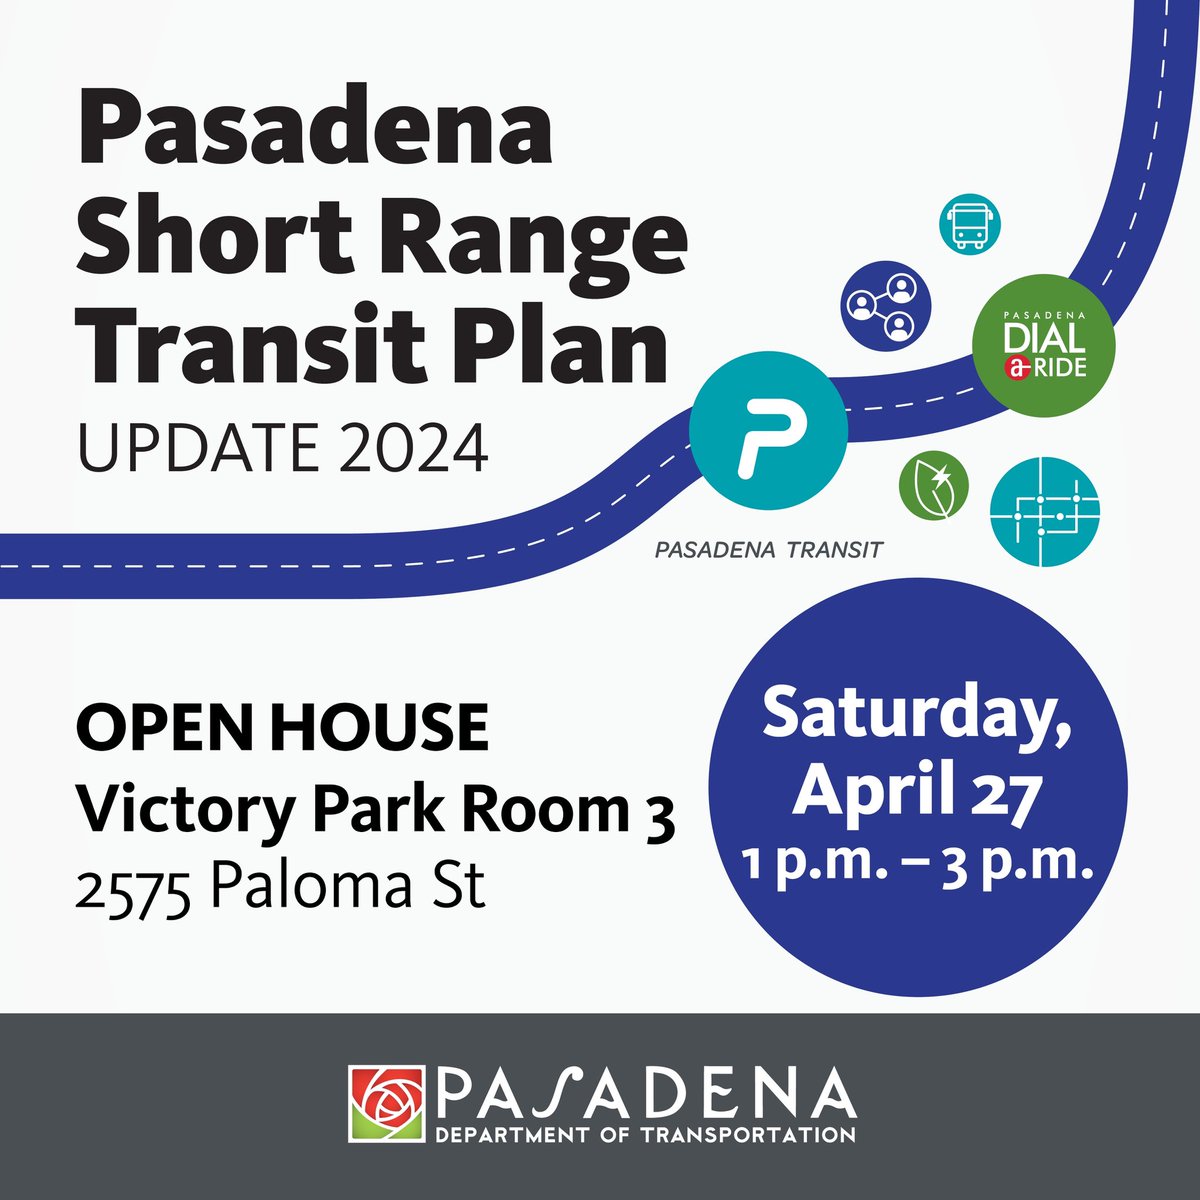 Join us this Sat. April 27 to learn about our Short Range Transit Plan update & provide feedback on public transit services. The meeting will be from 1 p.m. - 3 p.m. at Victory Park Community Center Rm 3 at 2575 Paloma Street. For more info. visit bit.ly/PasadenaSRTP.